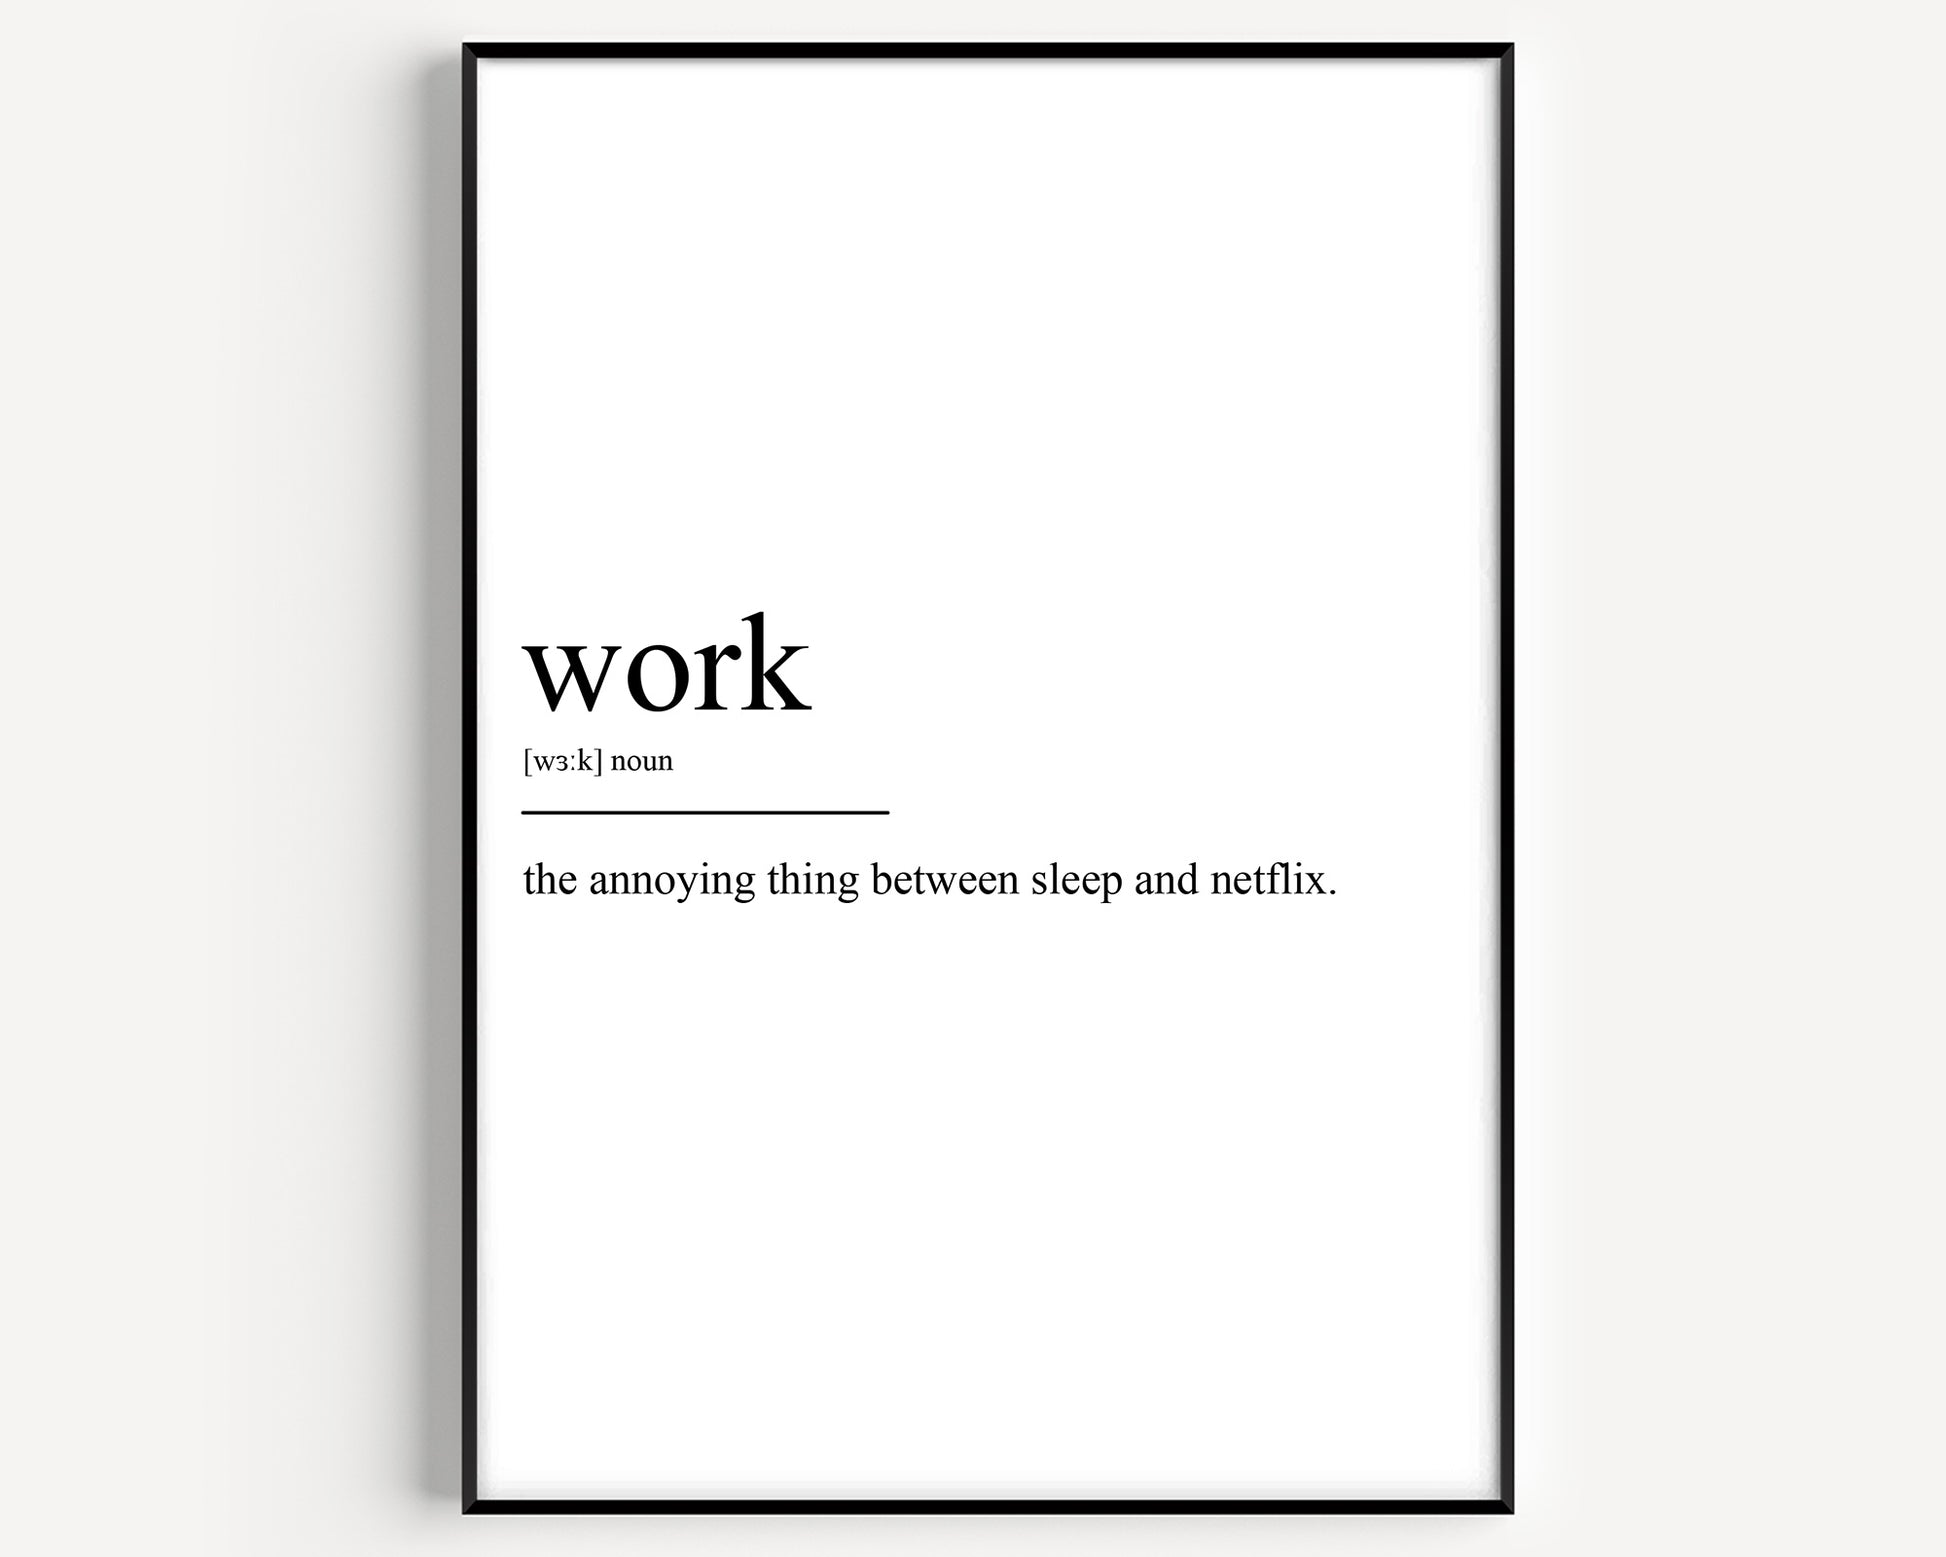 Work Definition Print - Magic Posters